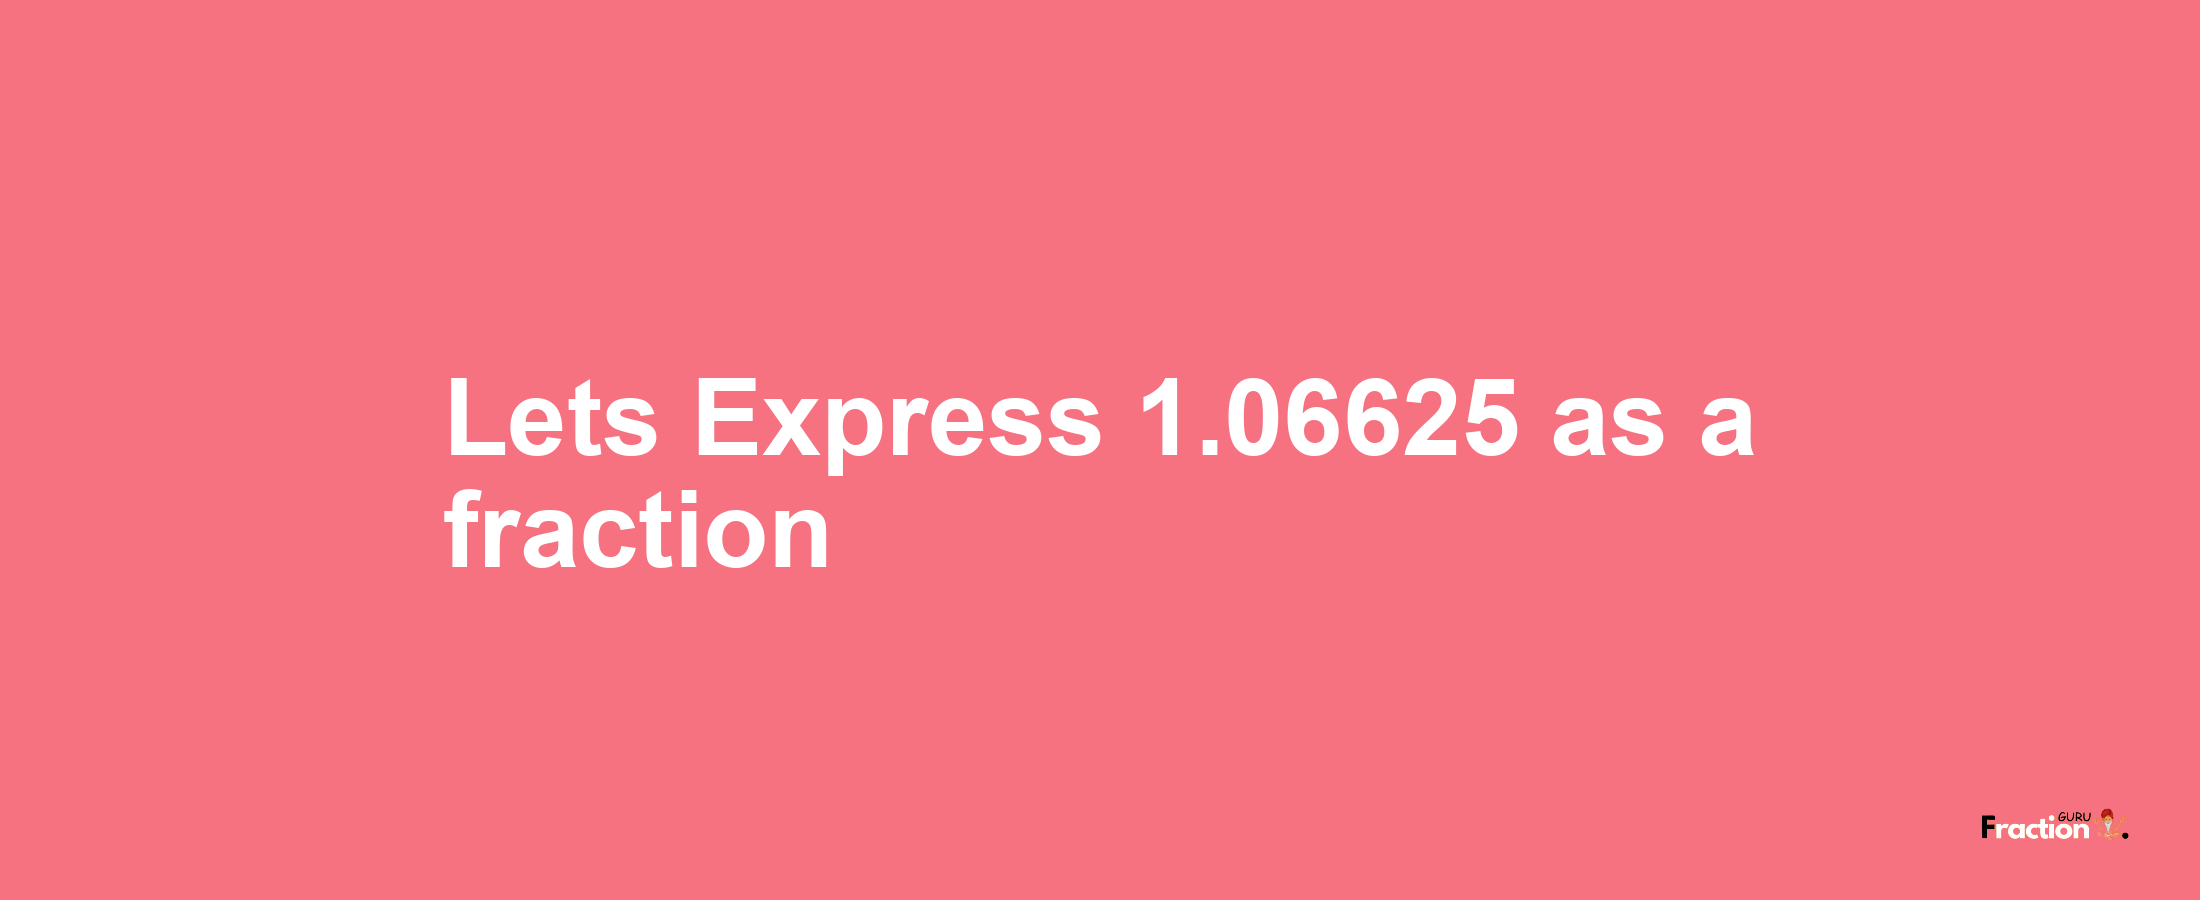 Lets Express 1.06625 as afraction